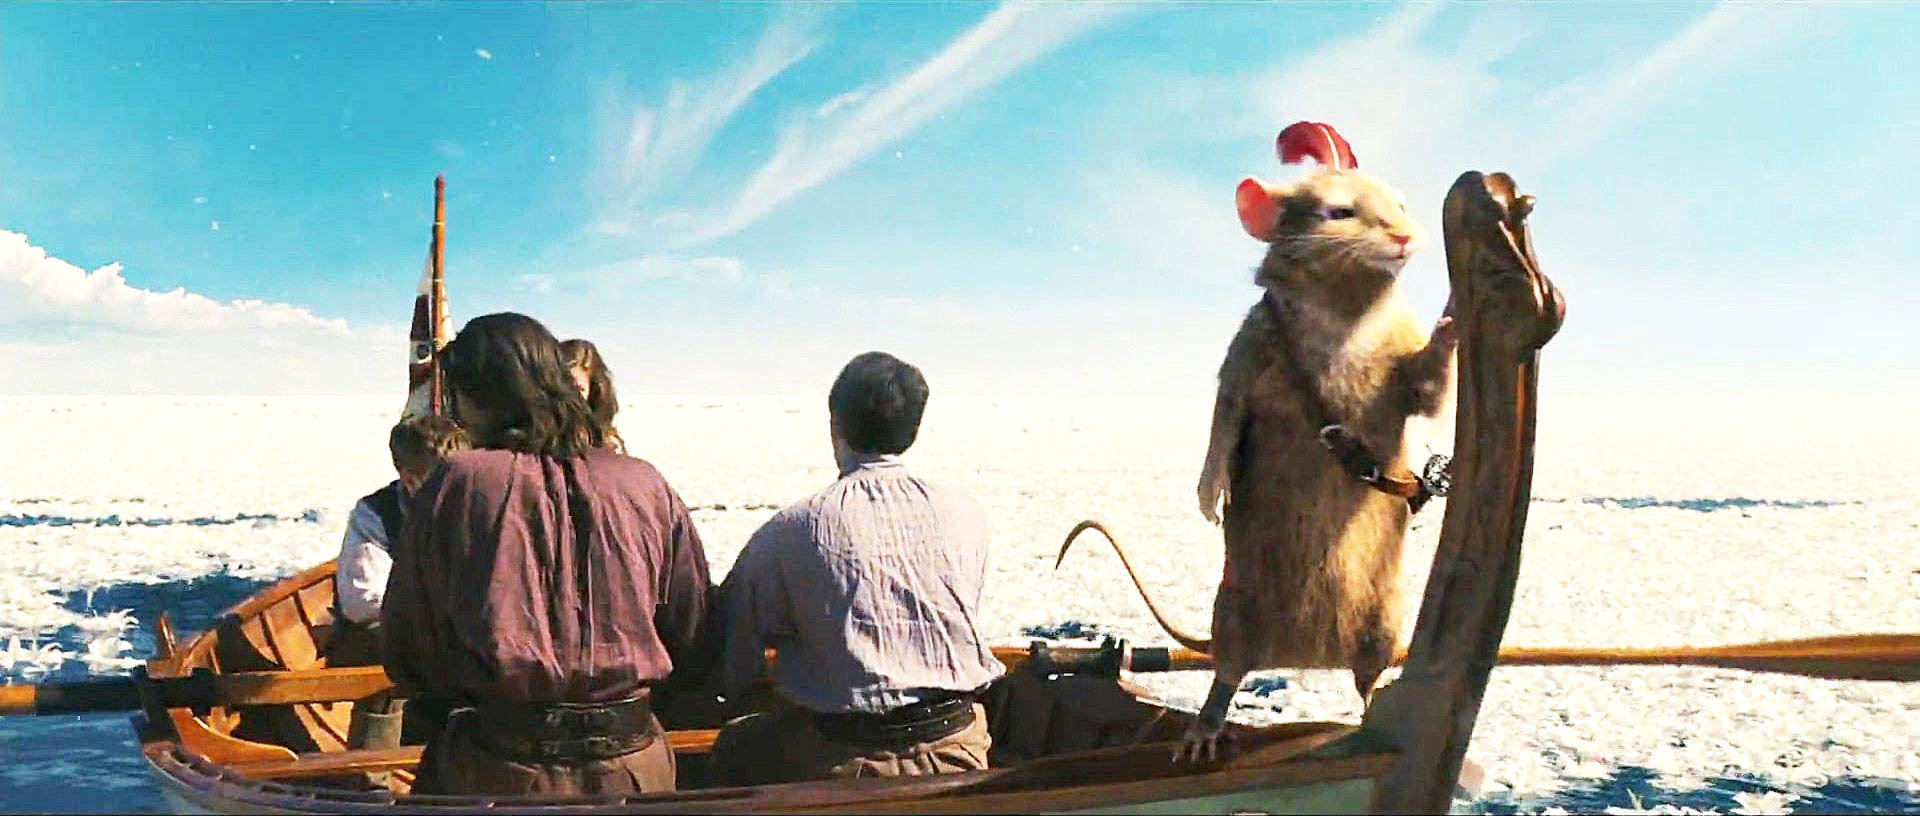 A scene from Fox Walden's The Chronicles of Narnia: The Voyage of the Dawn Treader (2010)